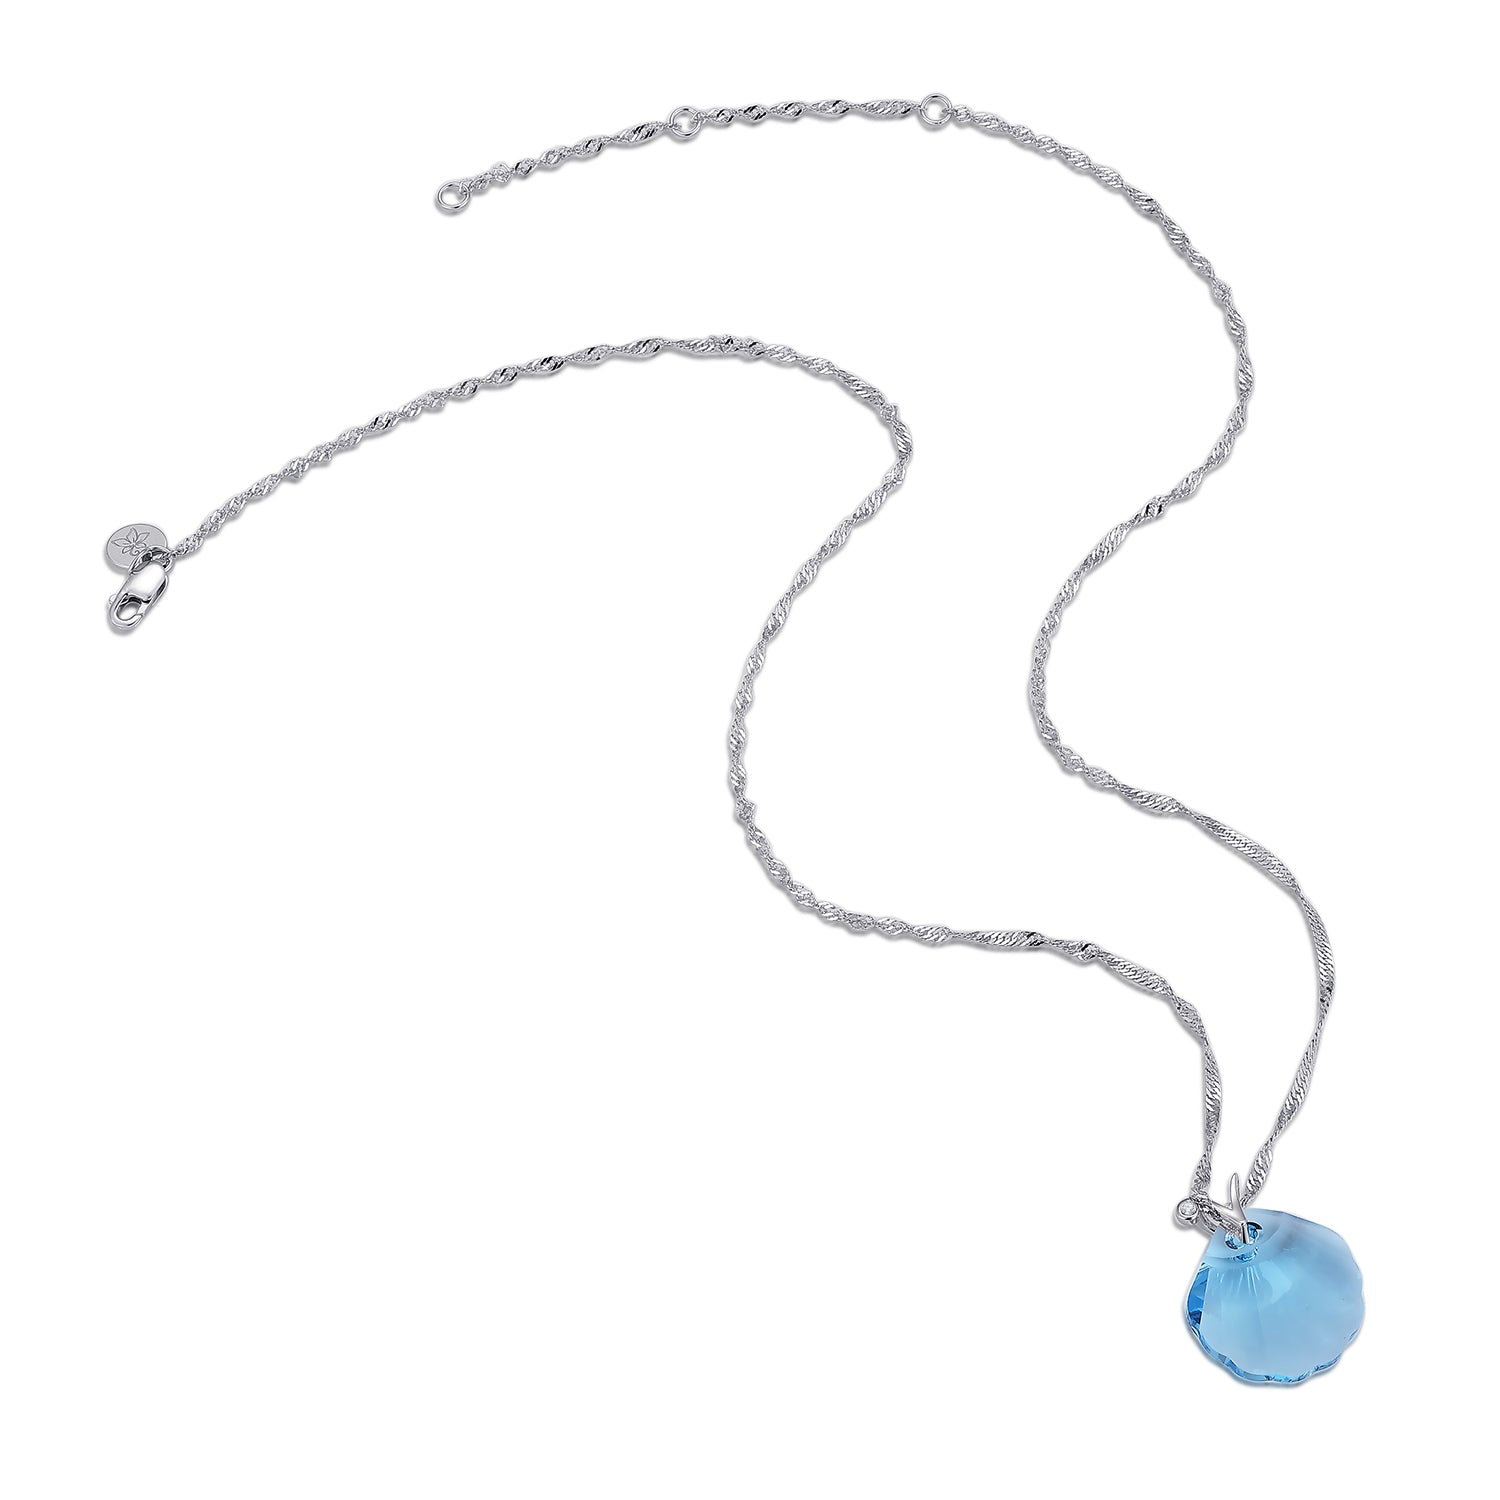 sterling silver shell pendant necklace adopts the top Austrian crystal